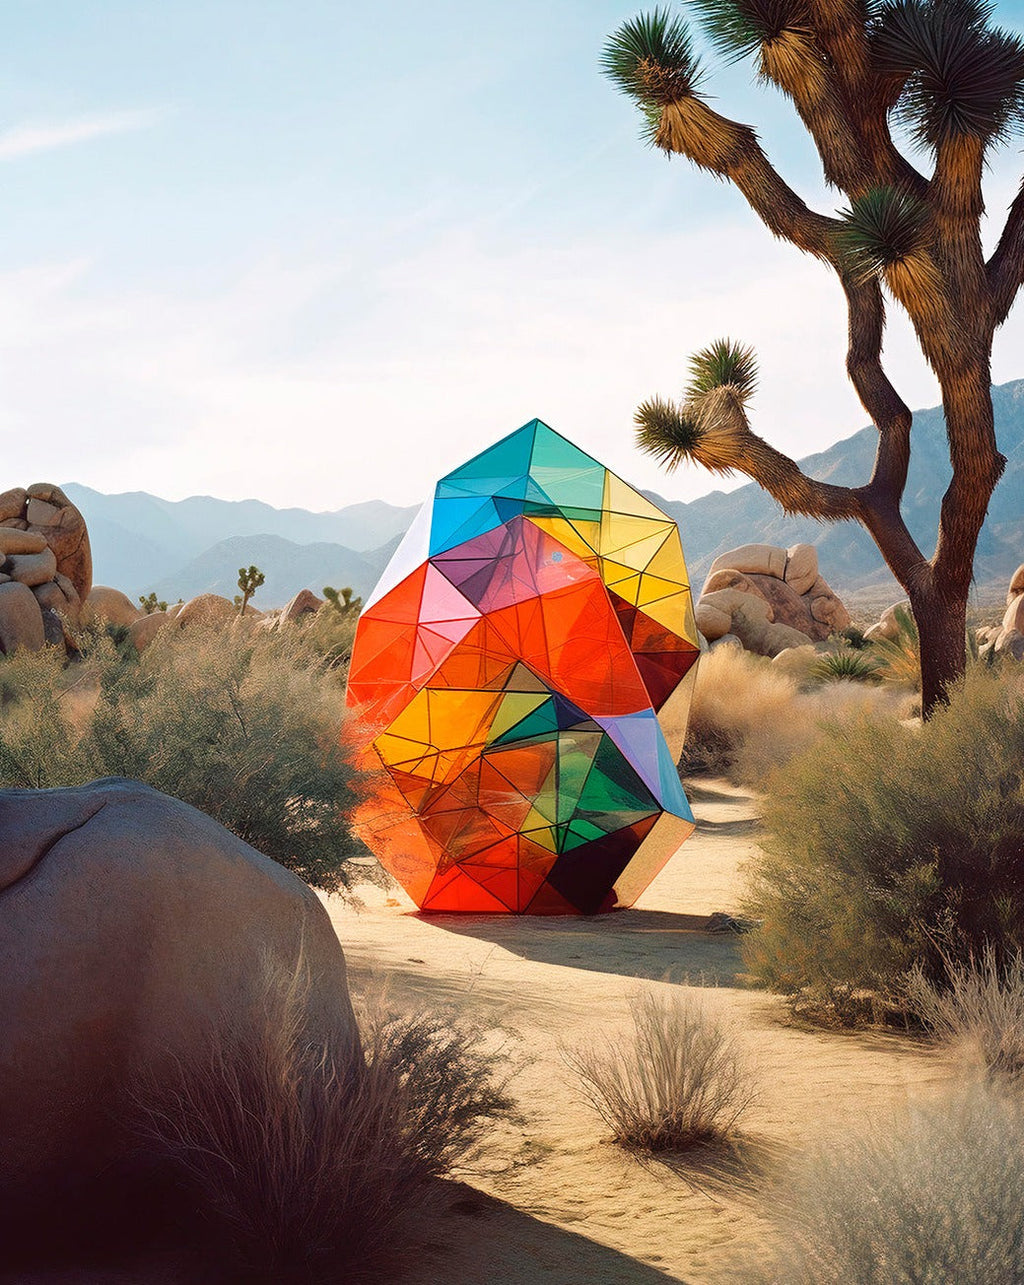 SCULPTURE IN JOSHUA TREE | IMPERFECTION